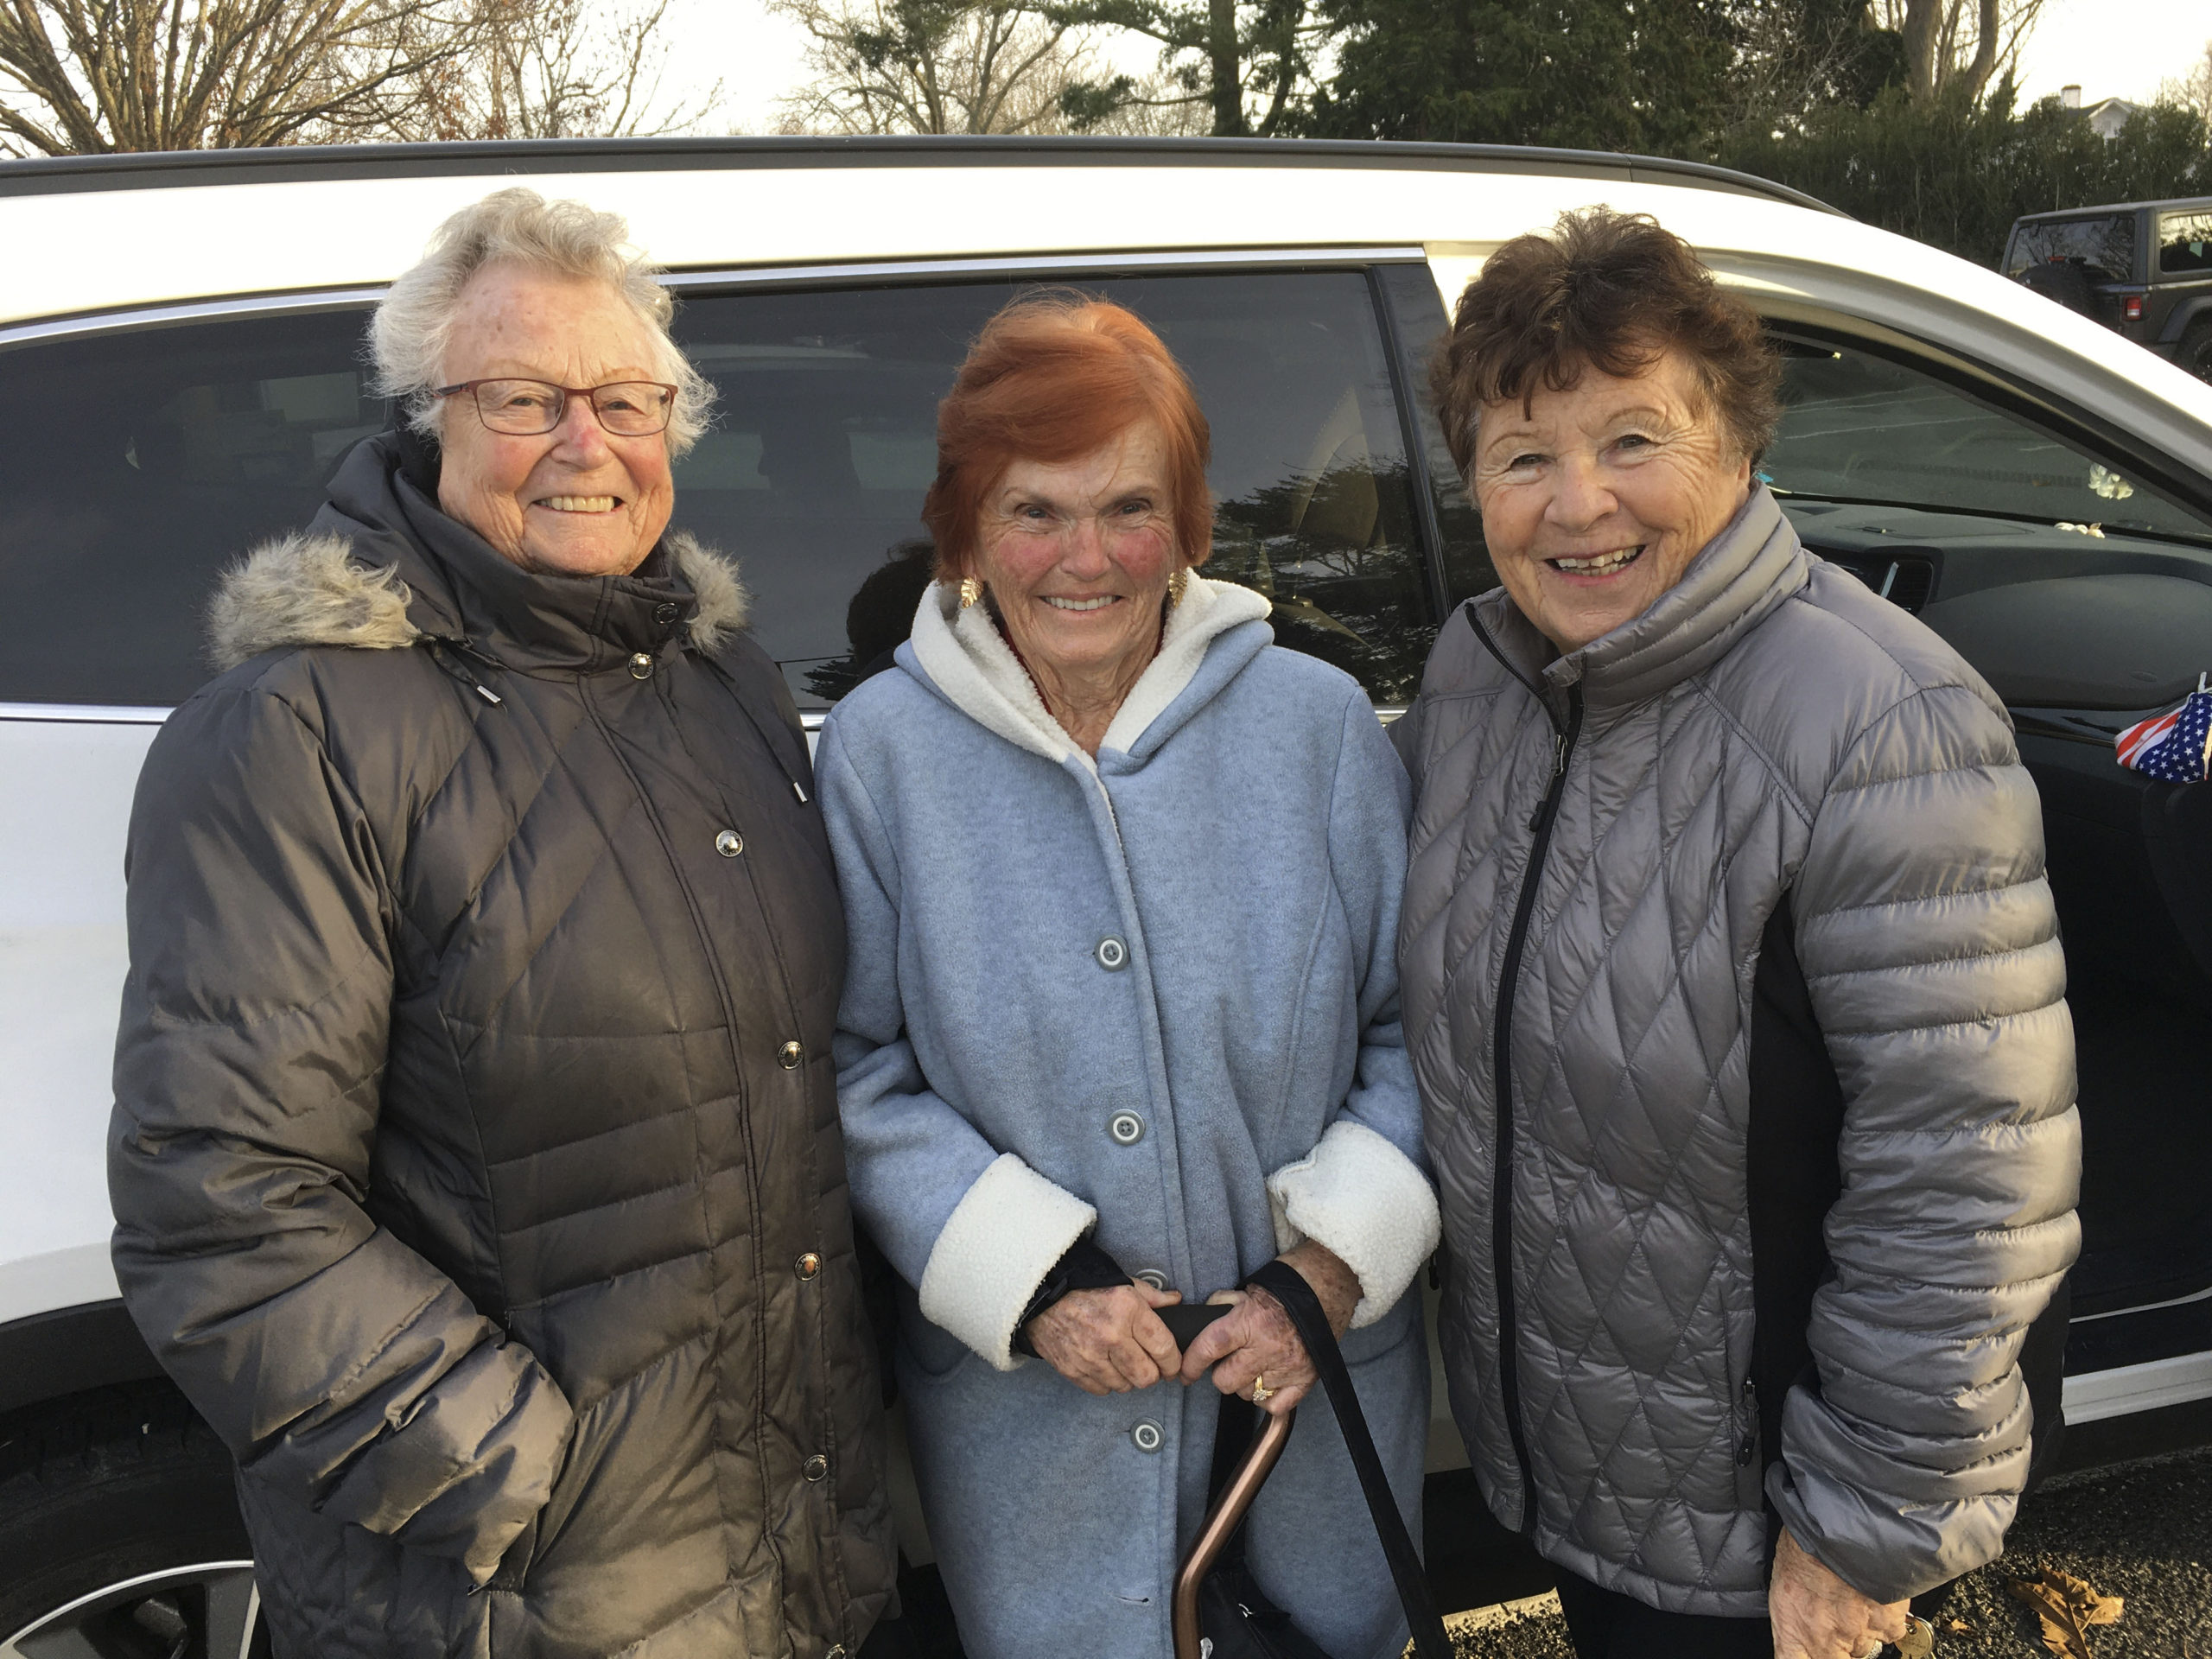 The Three Montauk Ladies, Ann Peterson, Kathy Mercurio and Maureen Senefelder, stopped at The Shops at L.V.I.S on Thursday for some Holiday shopping. Sadly, their usual fourth club member, Myrna Syvertsen passed away in November. Kathy revealed that she was wearing Myrna's coat, and spoke of their many years together as members of the Montauk Fire Department Ladies Auxiliary.    RICHARD LEWIN